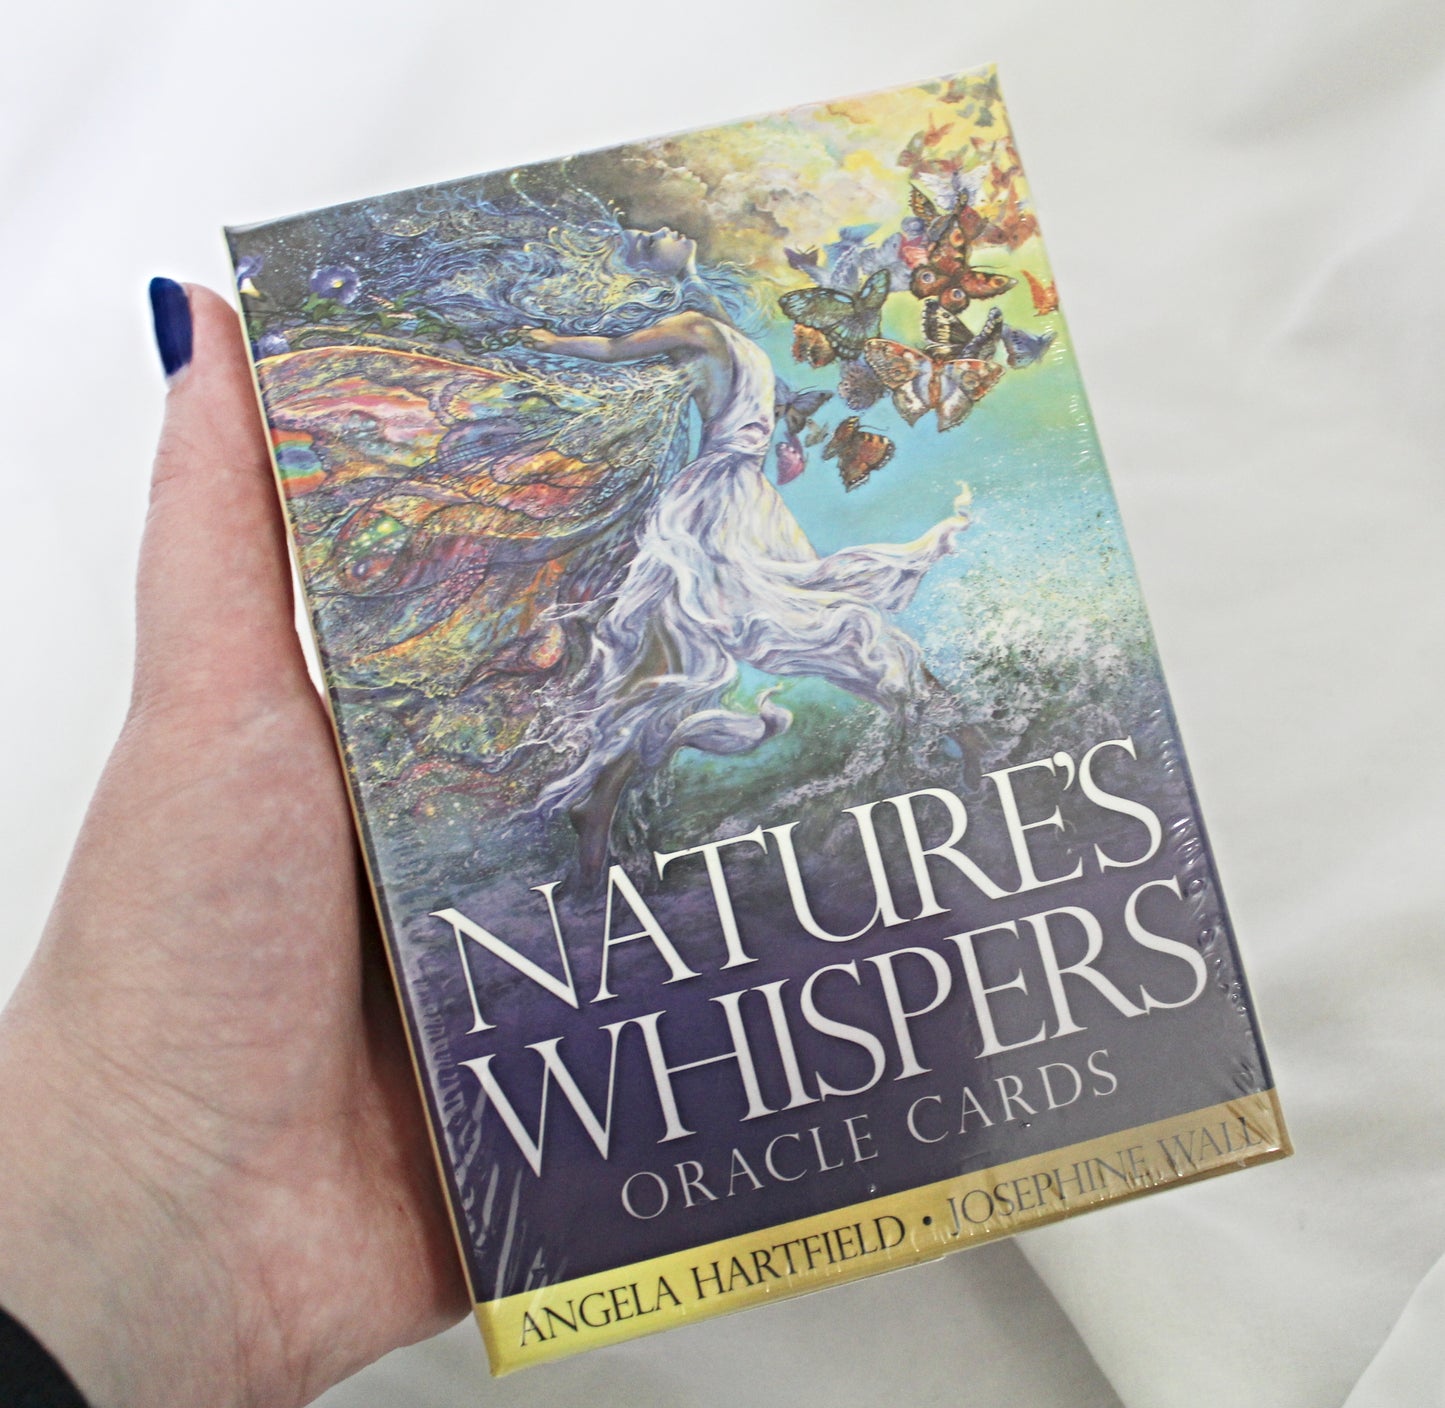 Nature's Whispers Oracle Cards